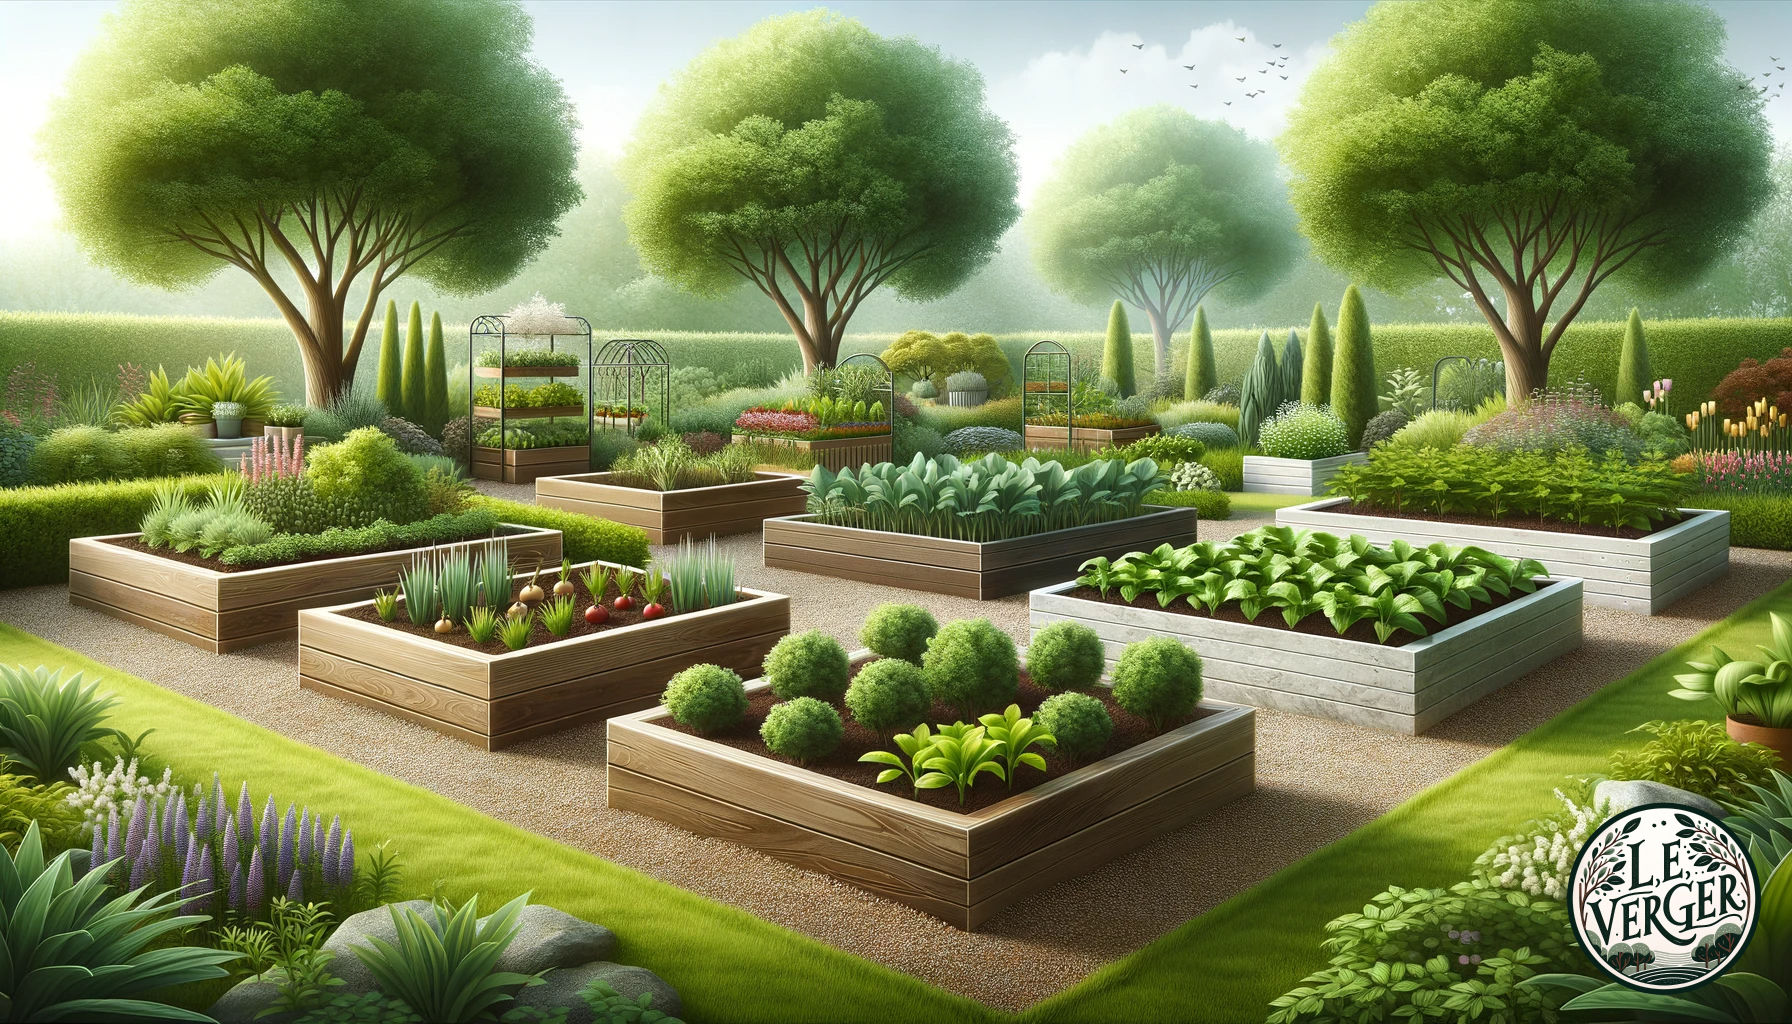 Wide illustration of a serene garden setting, featuring four raised beds made of different materials. One is a sturdy oak wood bed, the next is a sleek metal frame, followed by a bed made of natural stone, and finally a plastic bed. Each bed is teeming with life, filled with soil and a combination of lush plants, healthy shrubs, and ripe vegetables.